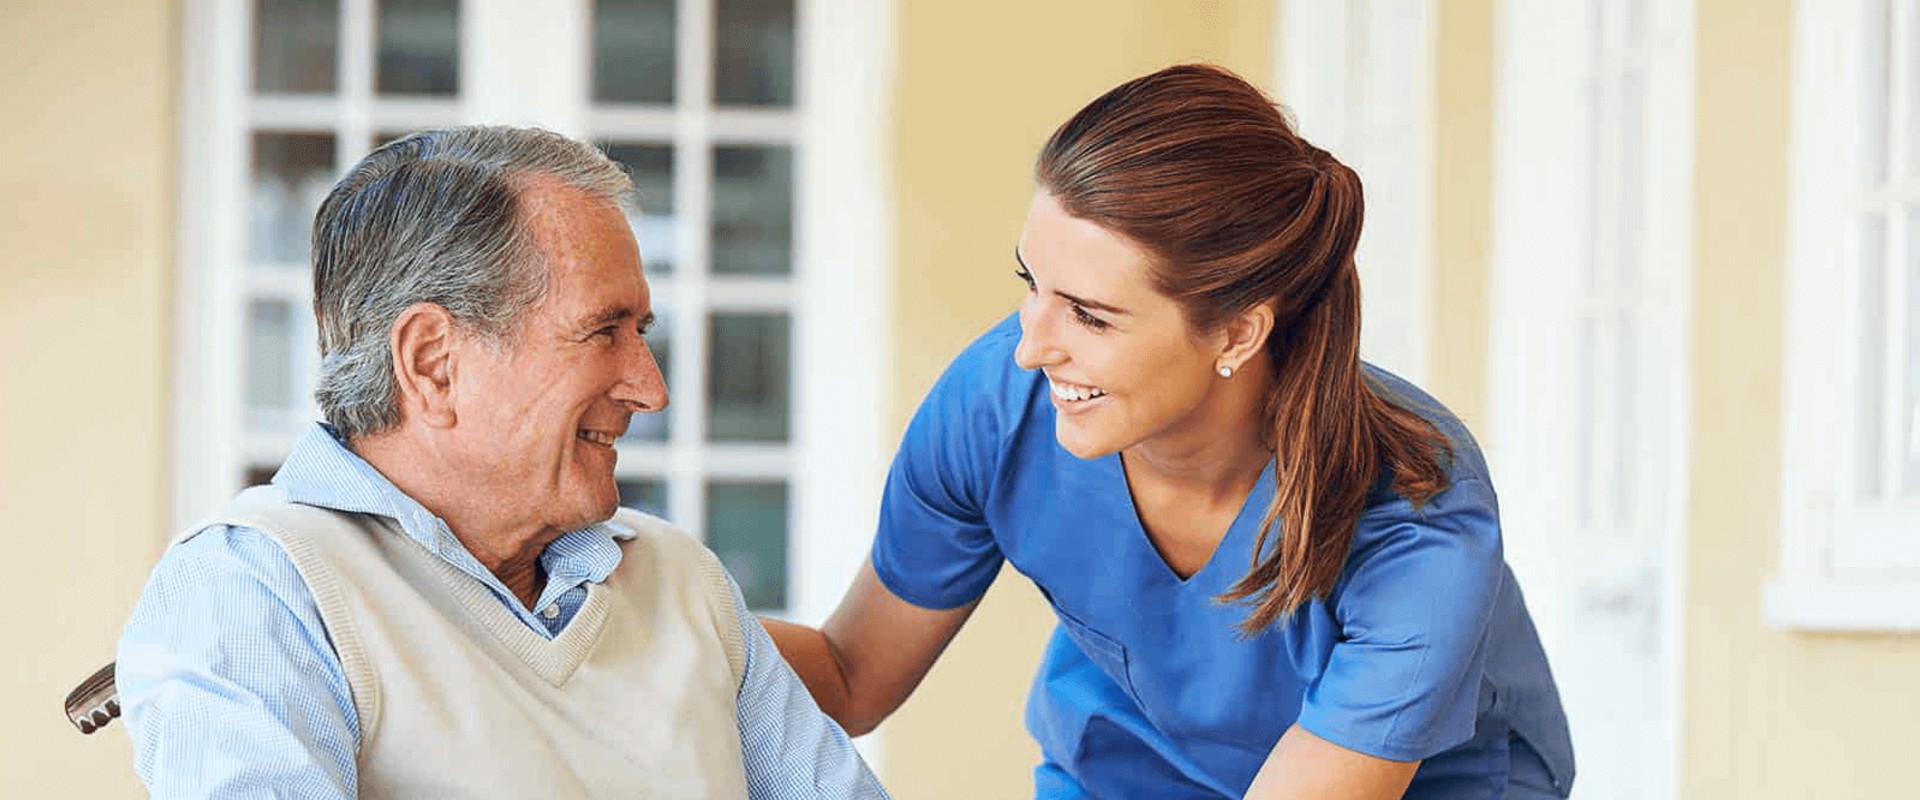 Ensuring Compliance with Laws and Regulations for Aged Care Staff Recruitment